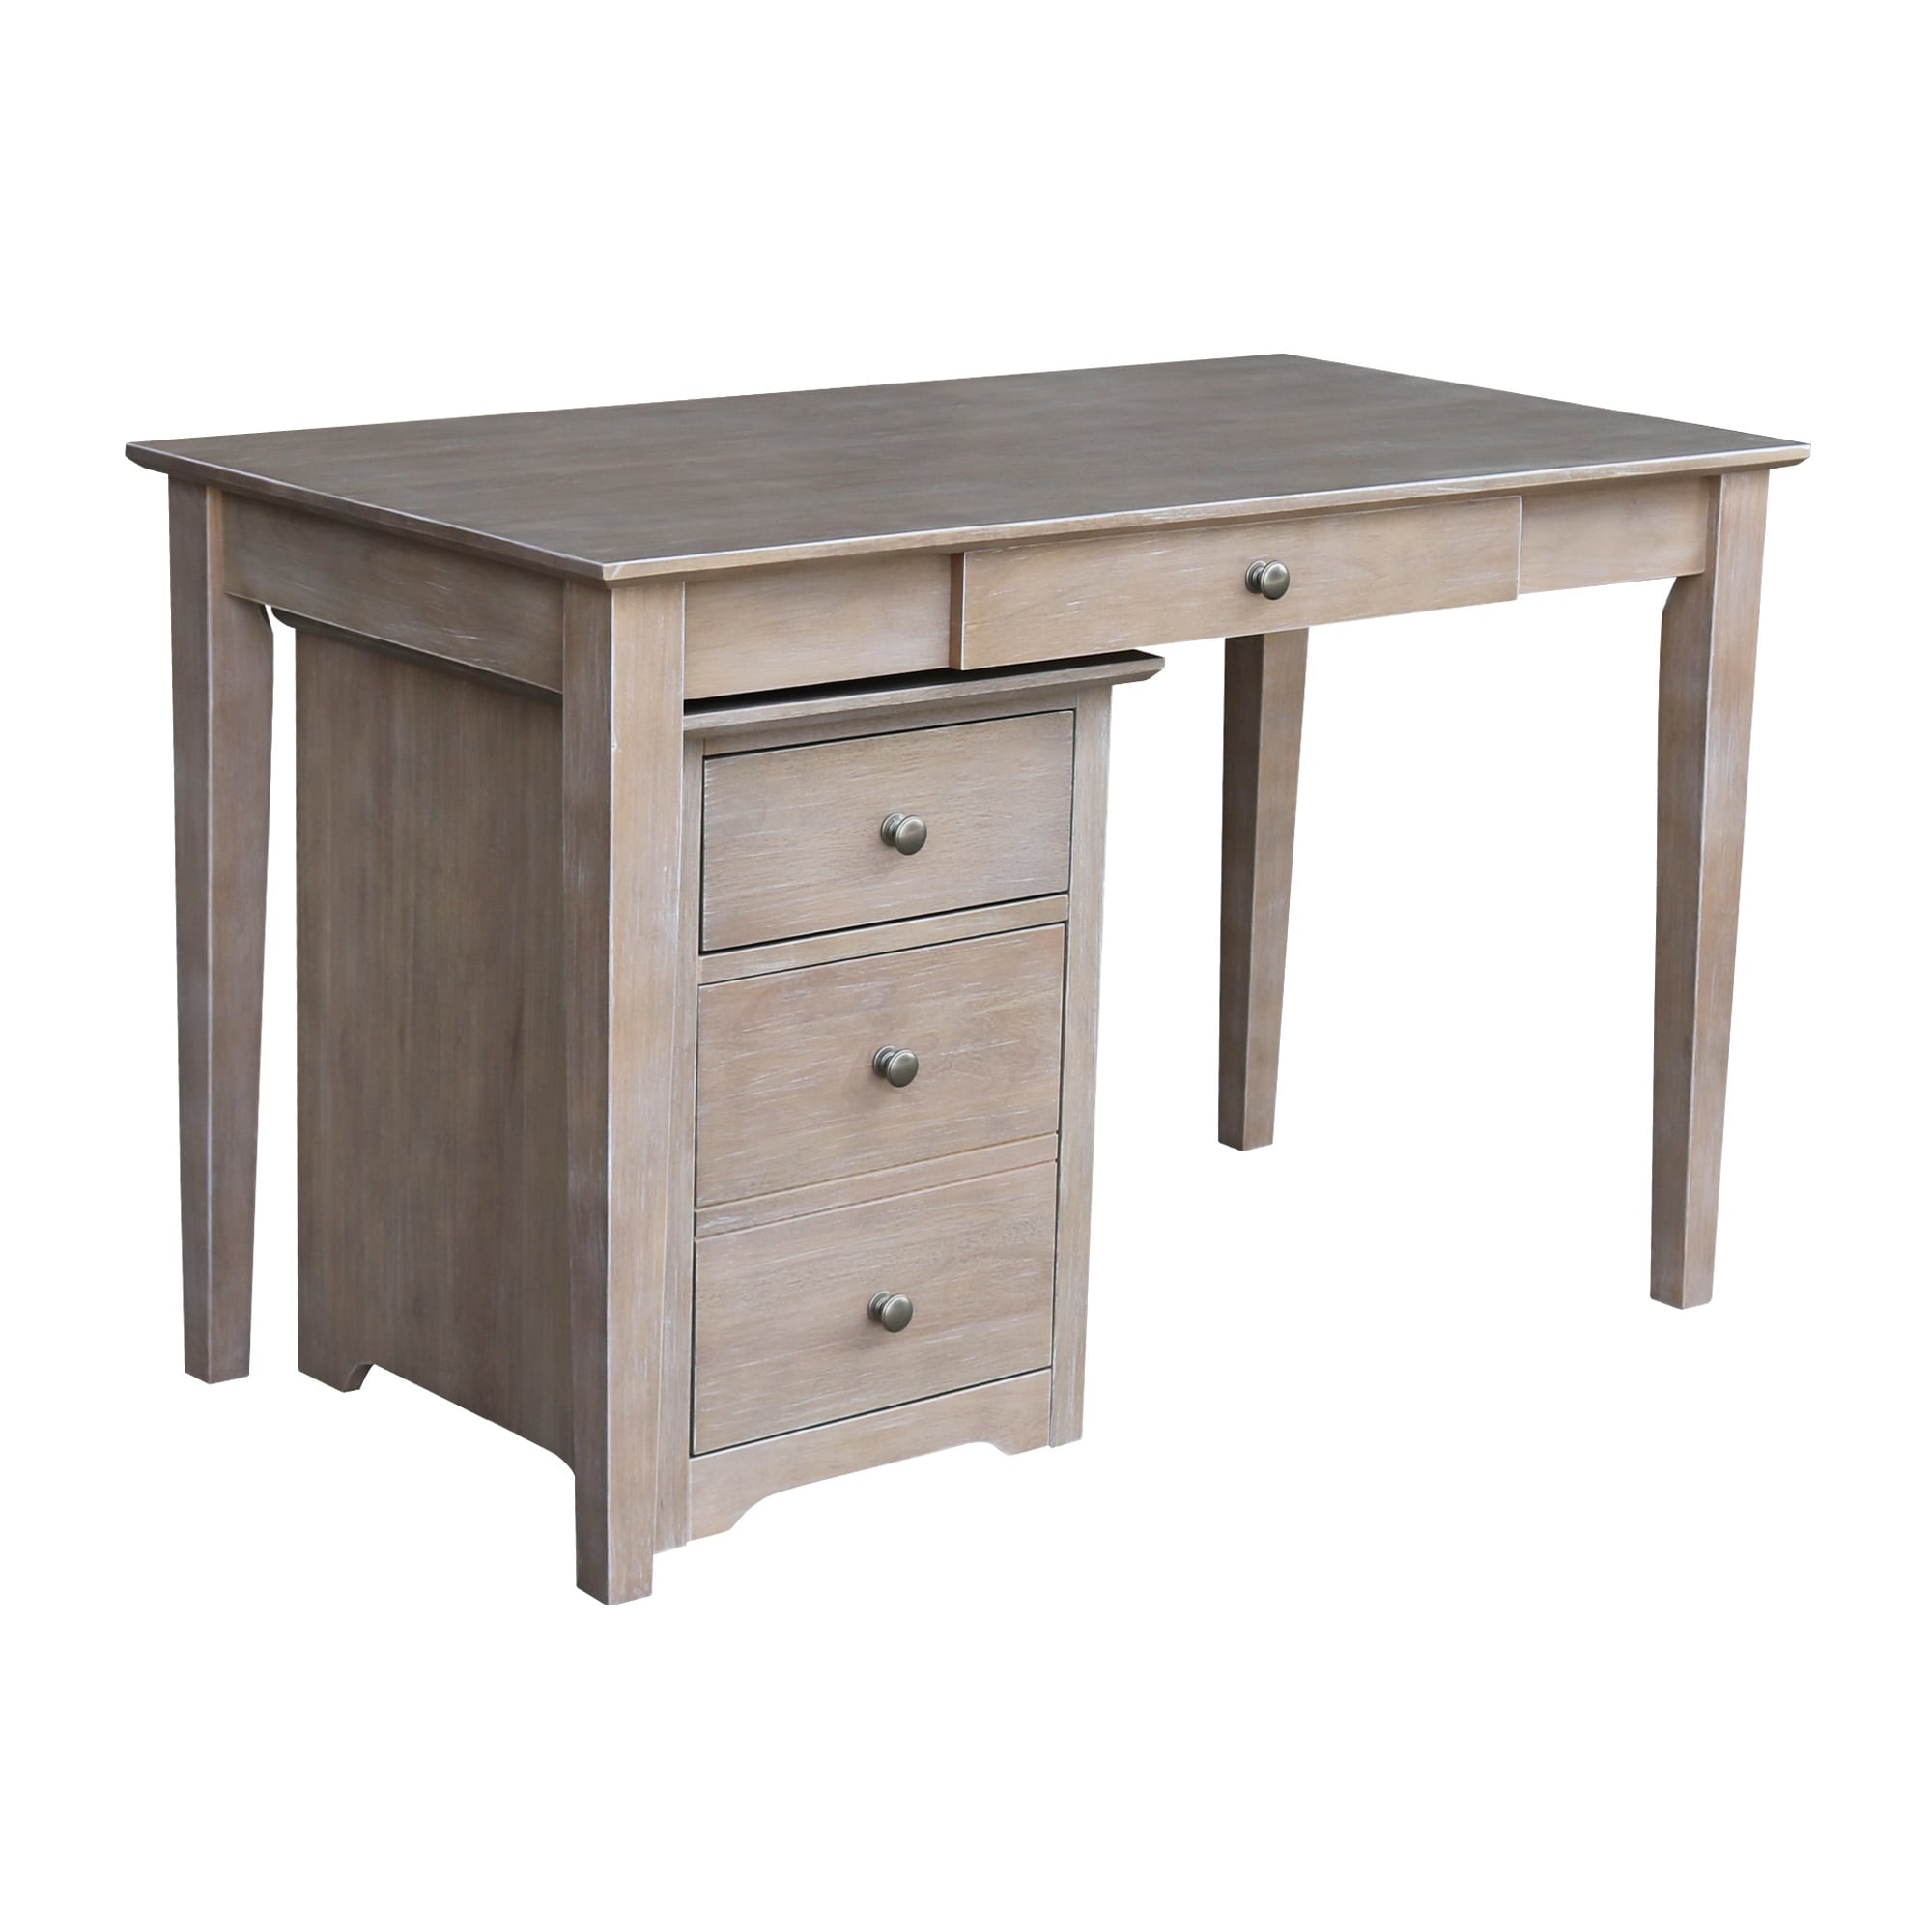 Larger Size And Chair Washed Gray Taupe International Concepts Desk With Drawer